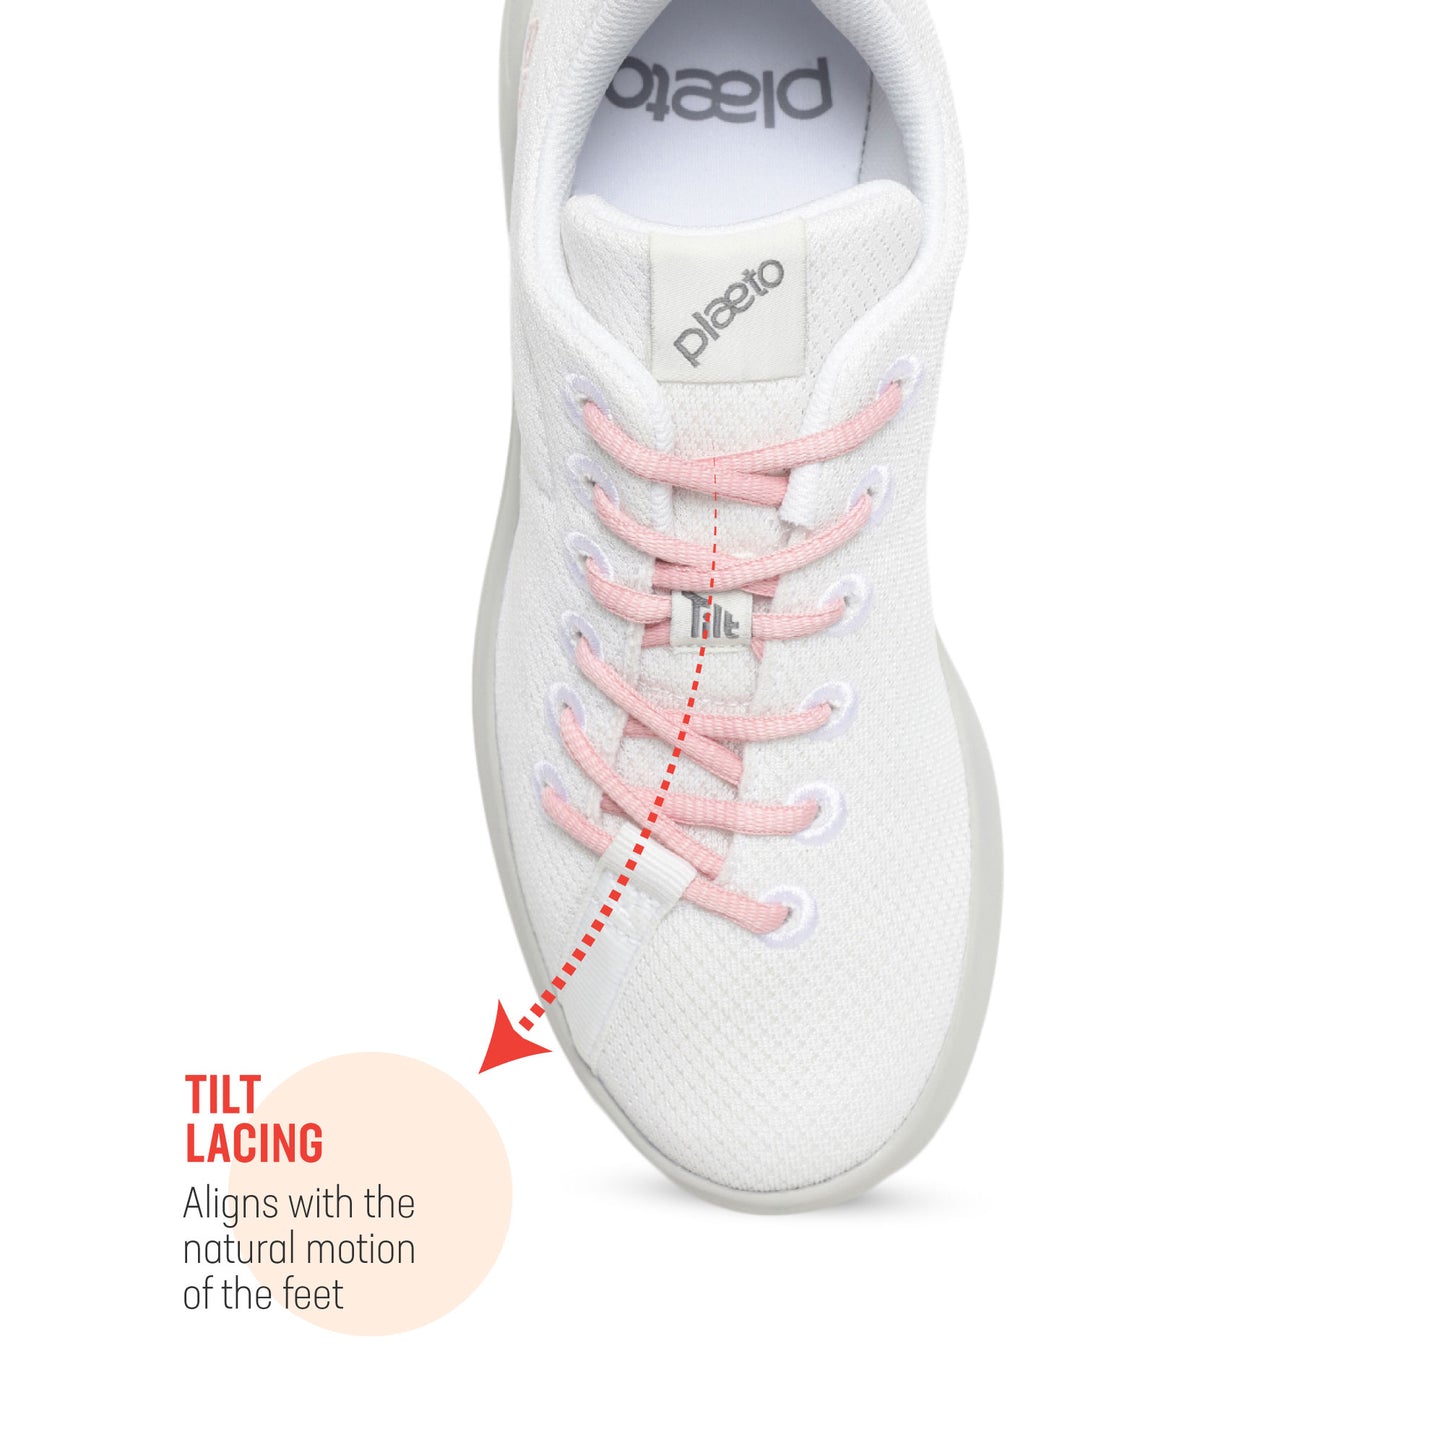 Classic Women's Multiplay Sneakers - White / Pink